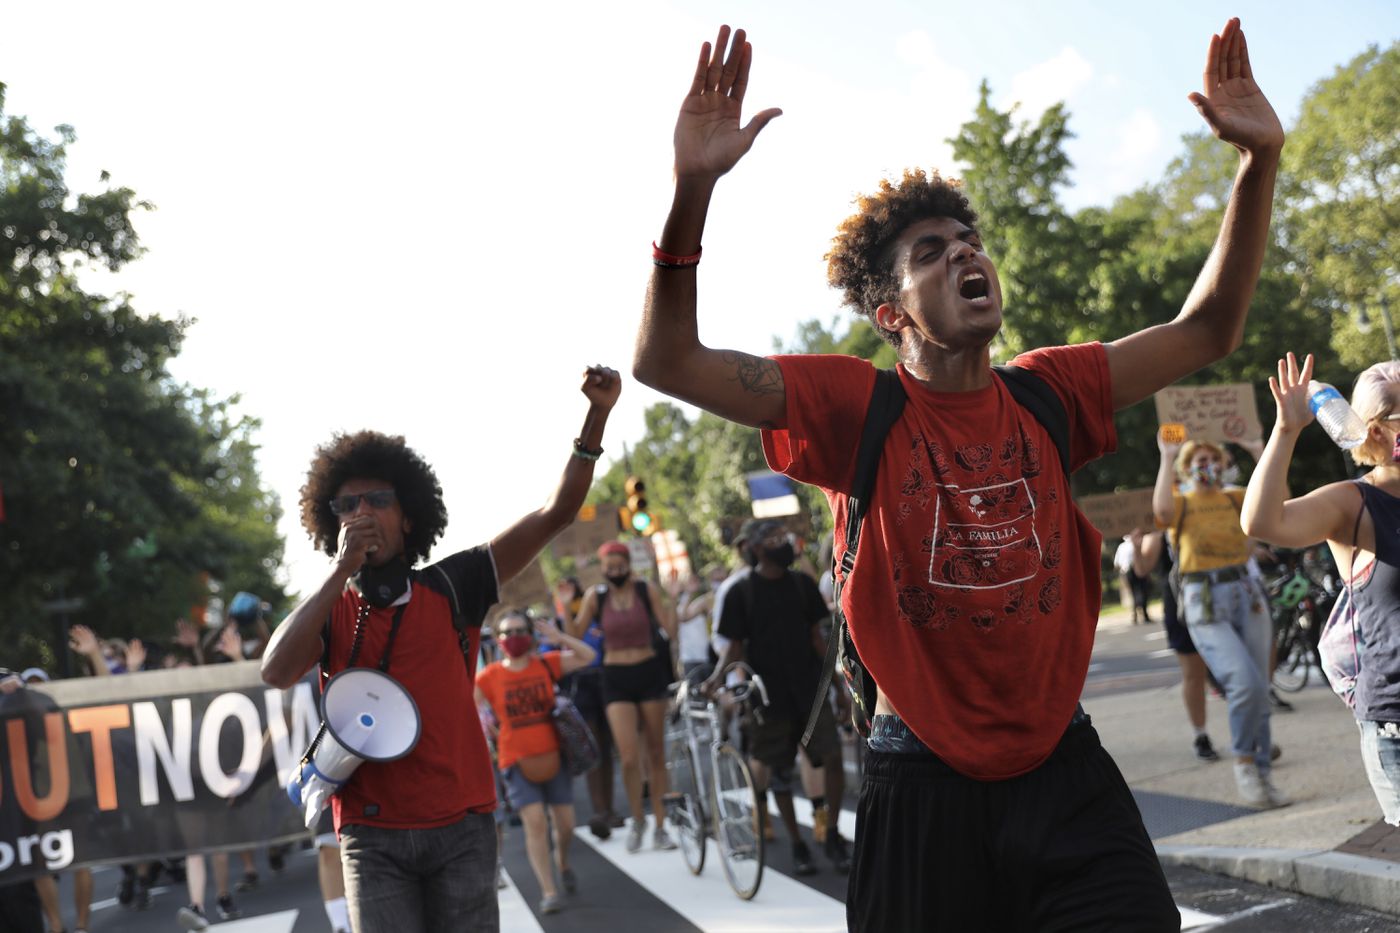 Kendell Simmons, left, of the group Delco Resists, and Xavier Wofford of the group I Will Breathe, lead a chant during a protest Saturday in Philadelphia in support of Black Lives Matter and against the Trump administration’s deployment of federal officers to U.S. cities.